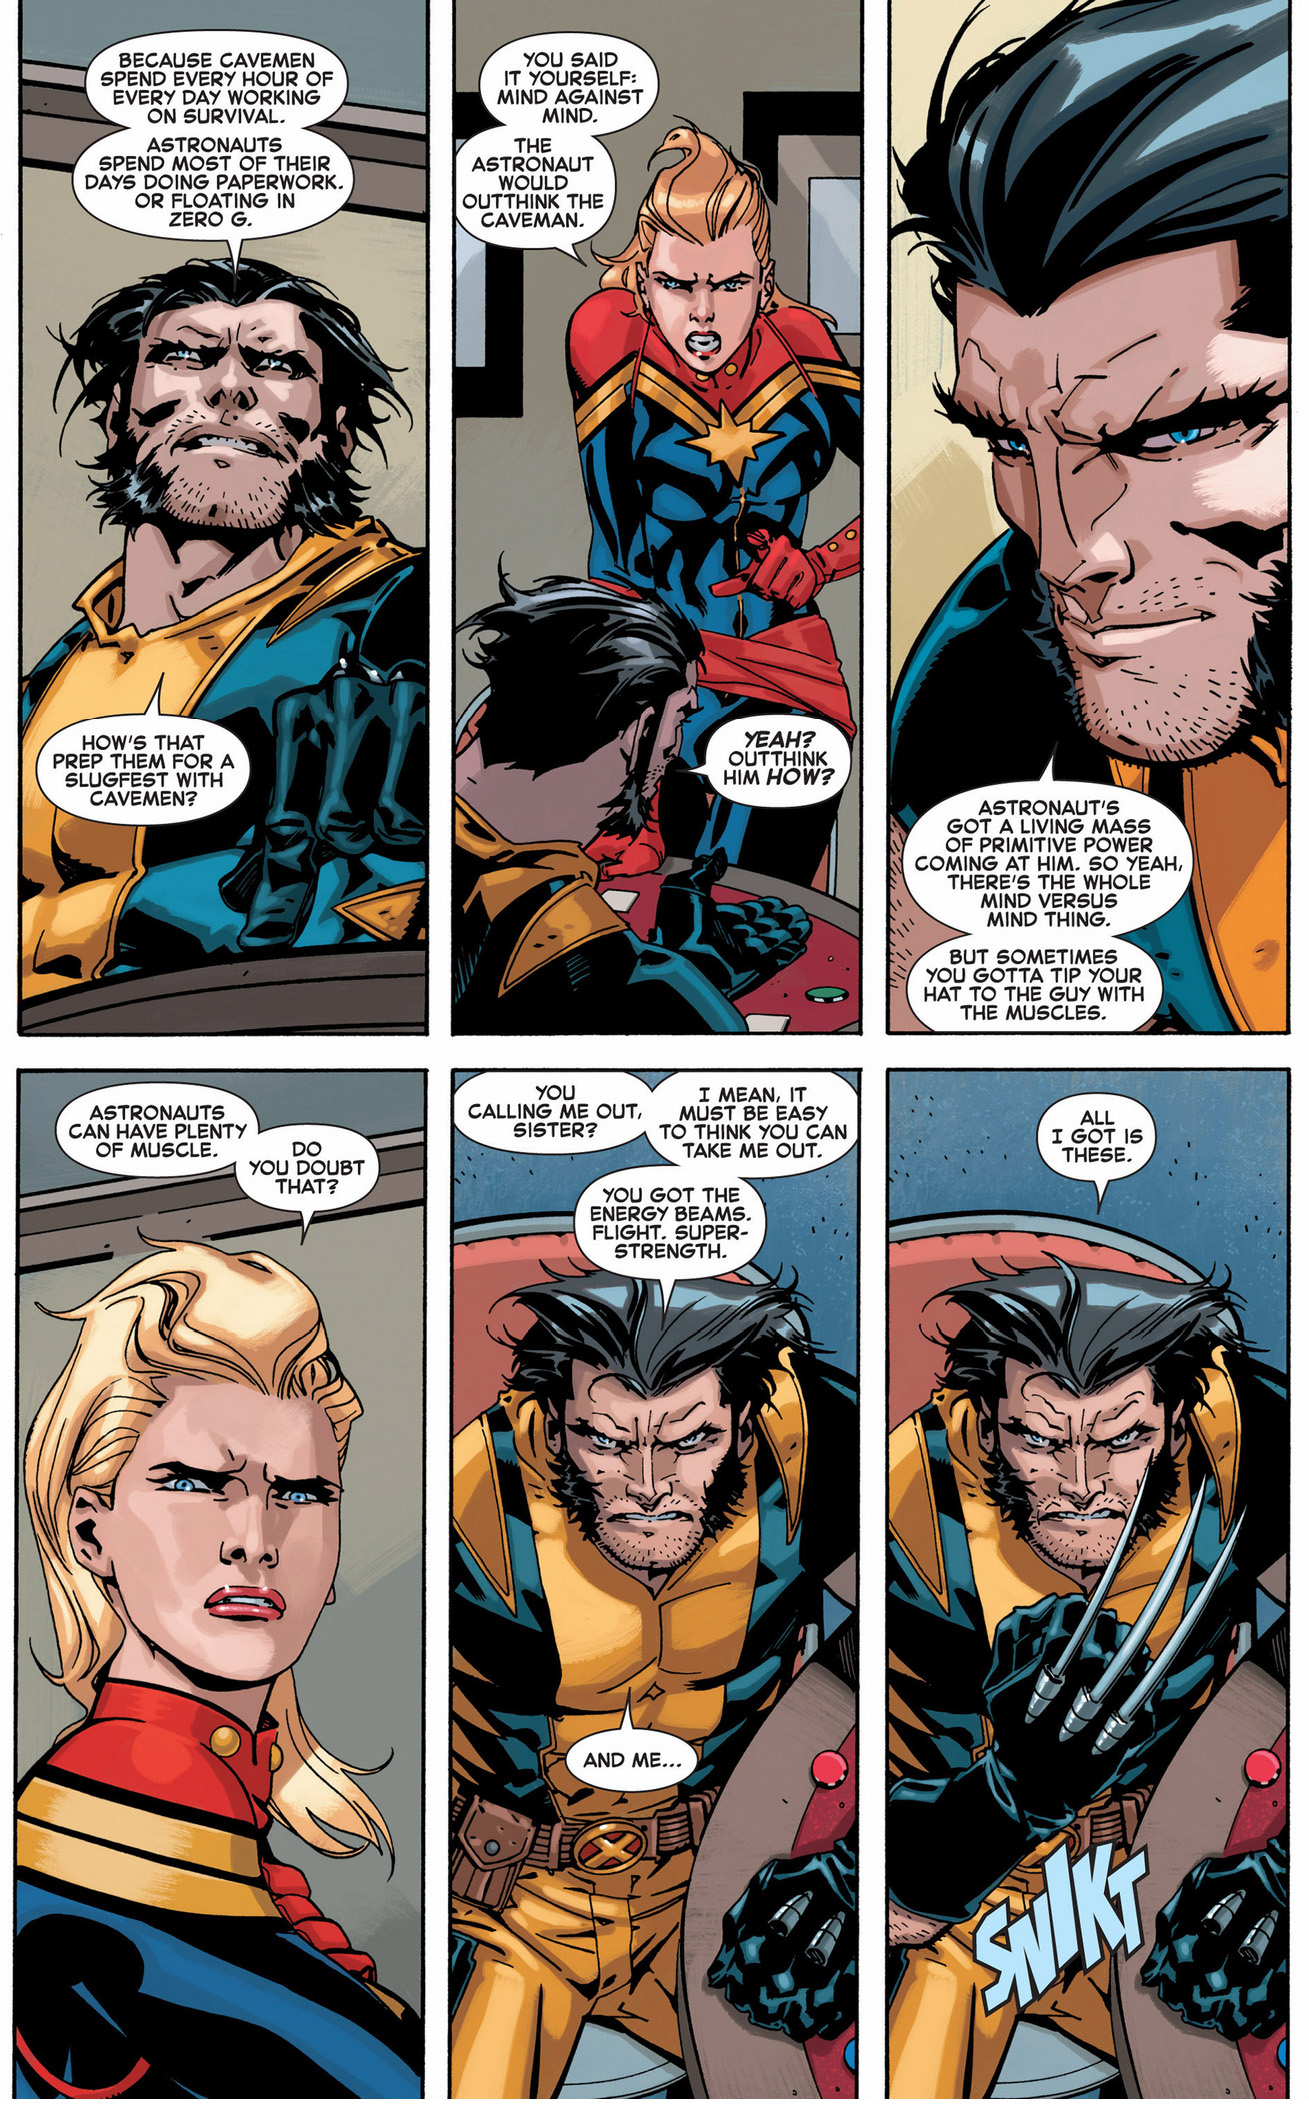 wolverine and captain marvel having a debate